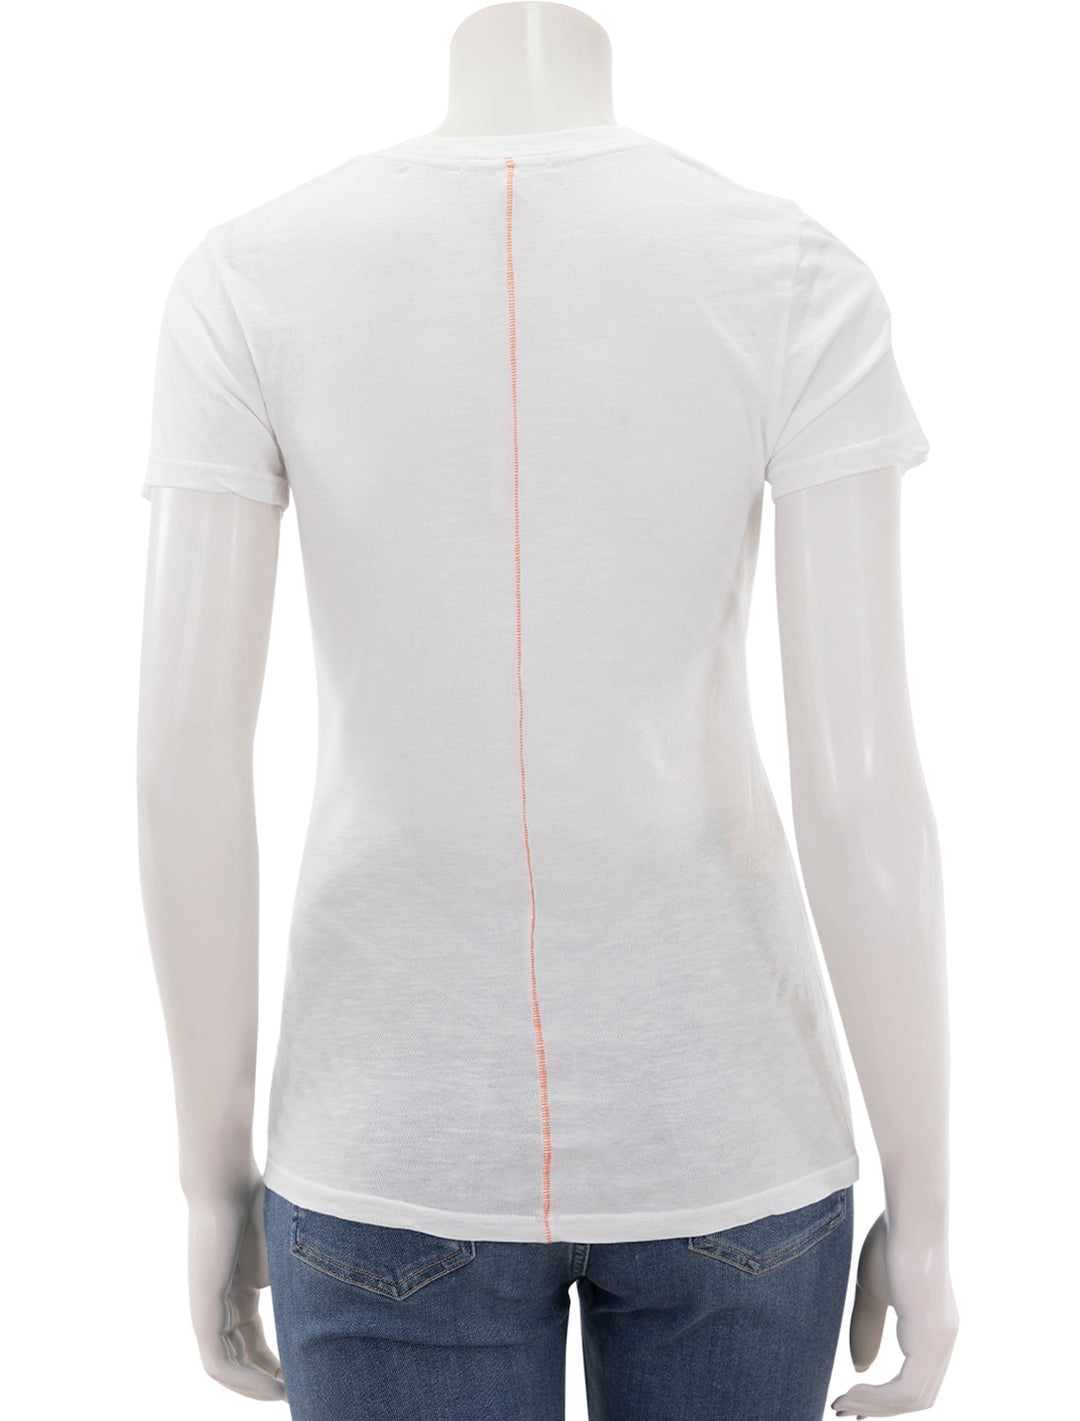 Back view of Sundry's oui tee in white.